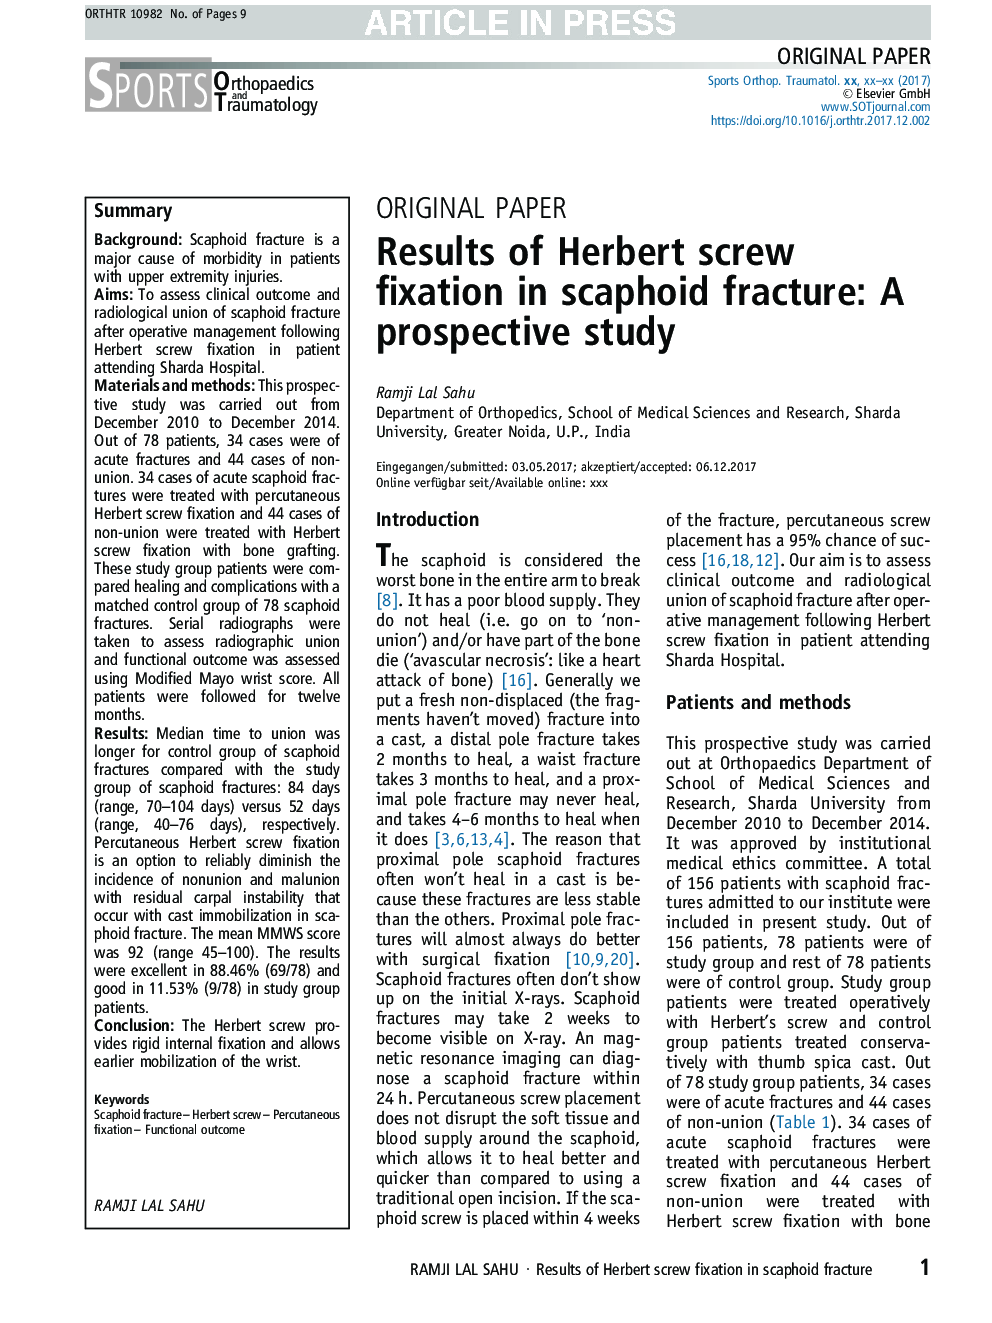 Results of Herbert screw fixation in scaphoid fracture: A prospective study